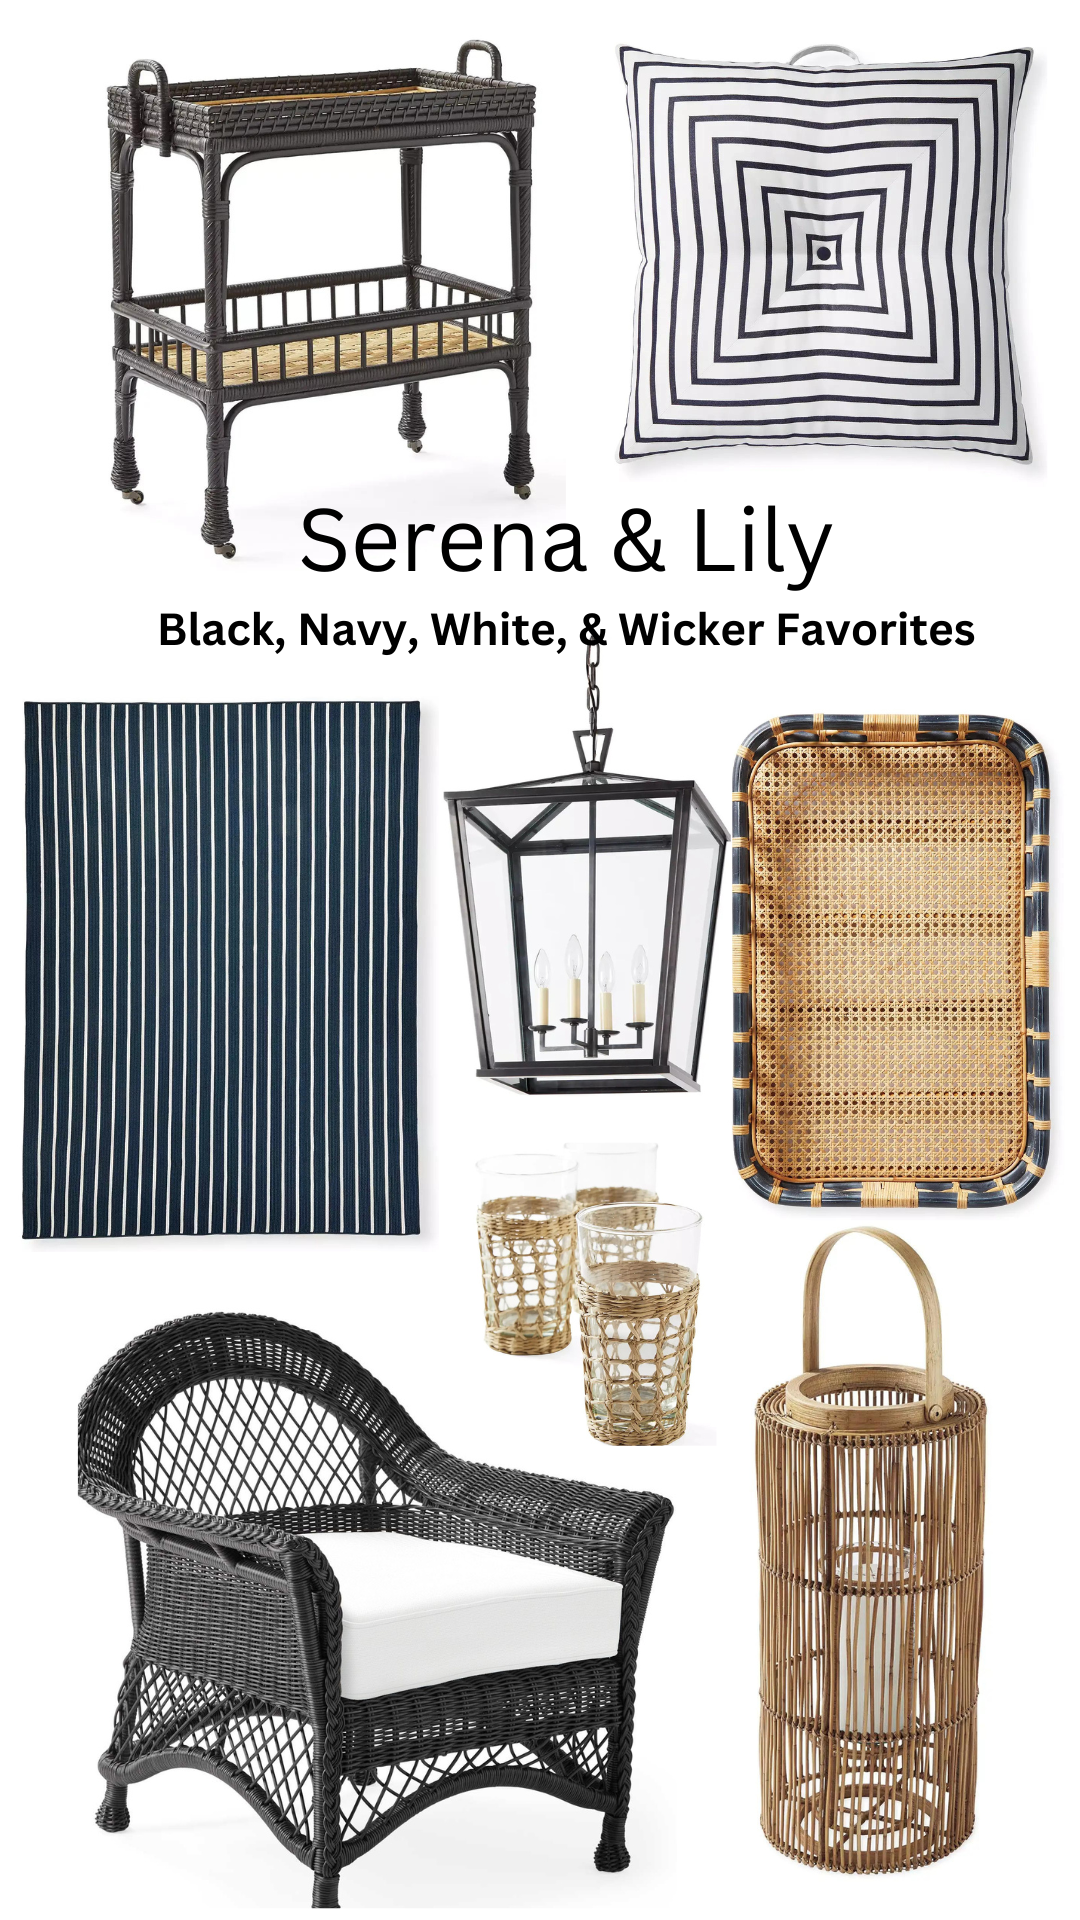 Black, Navy, White, & Wicker Beach House Decor from Serena and Lily